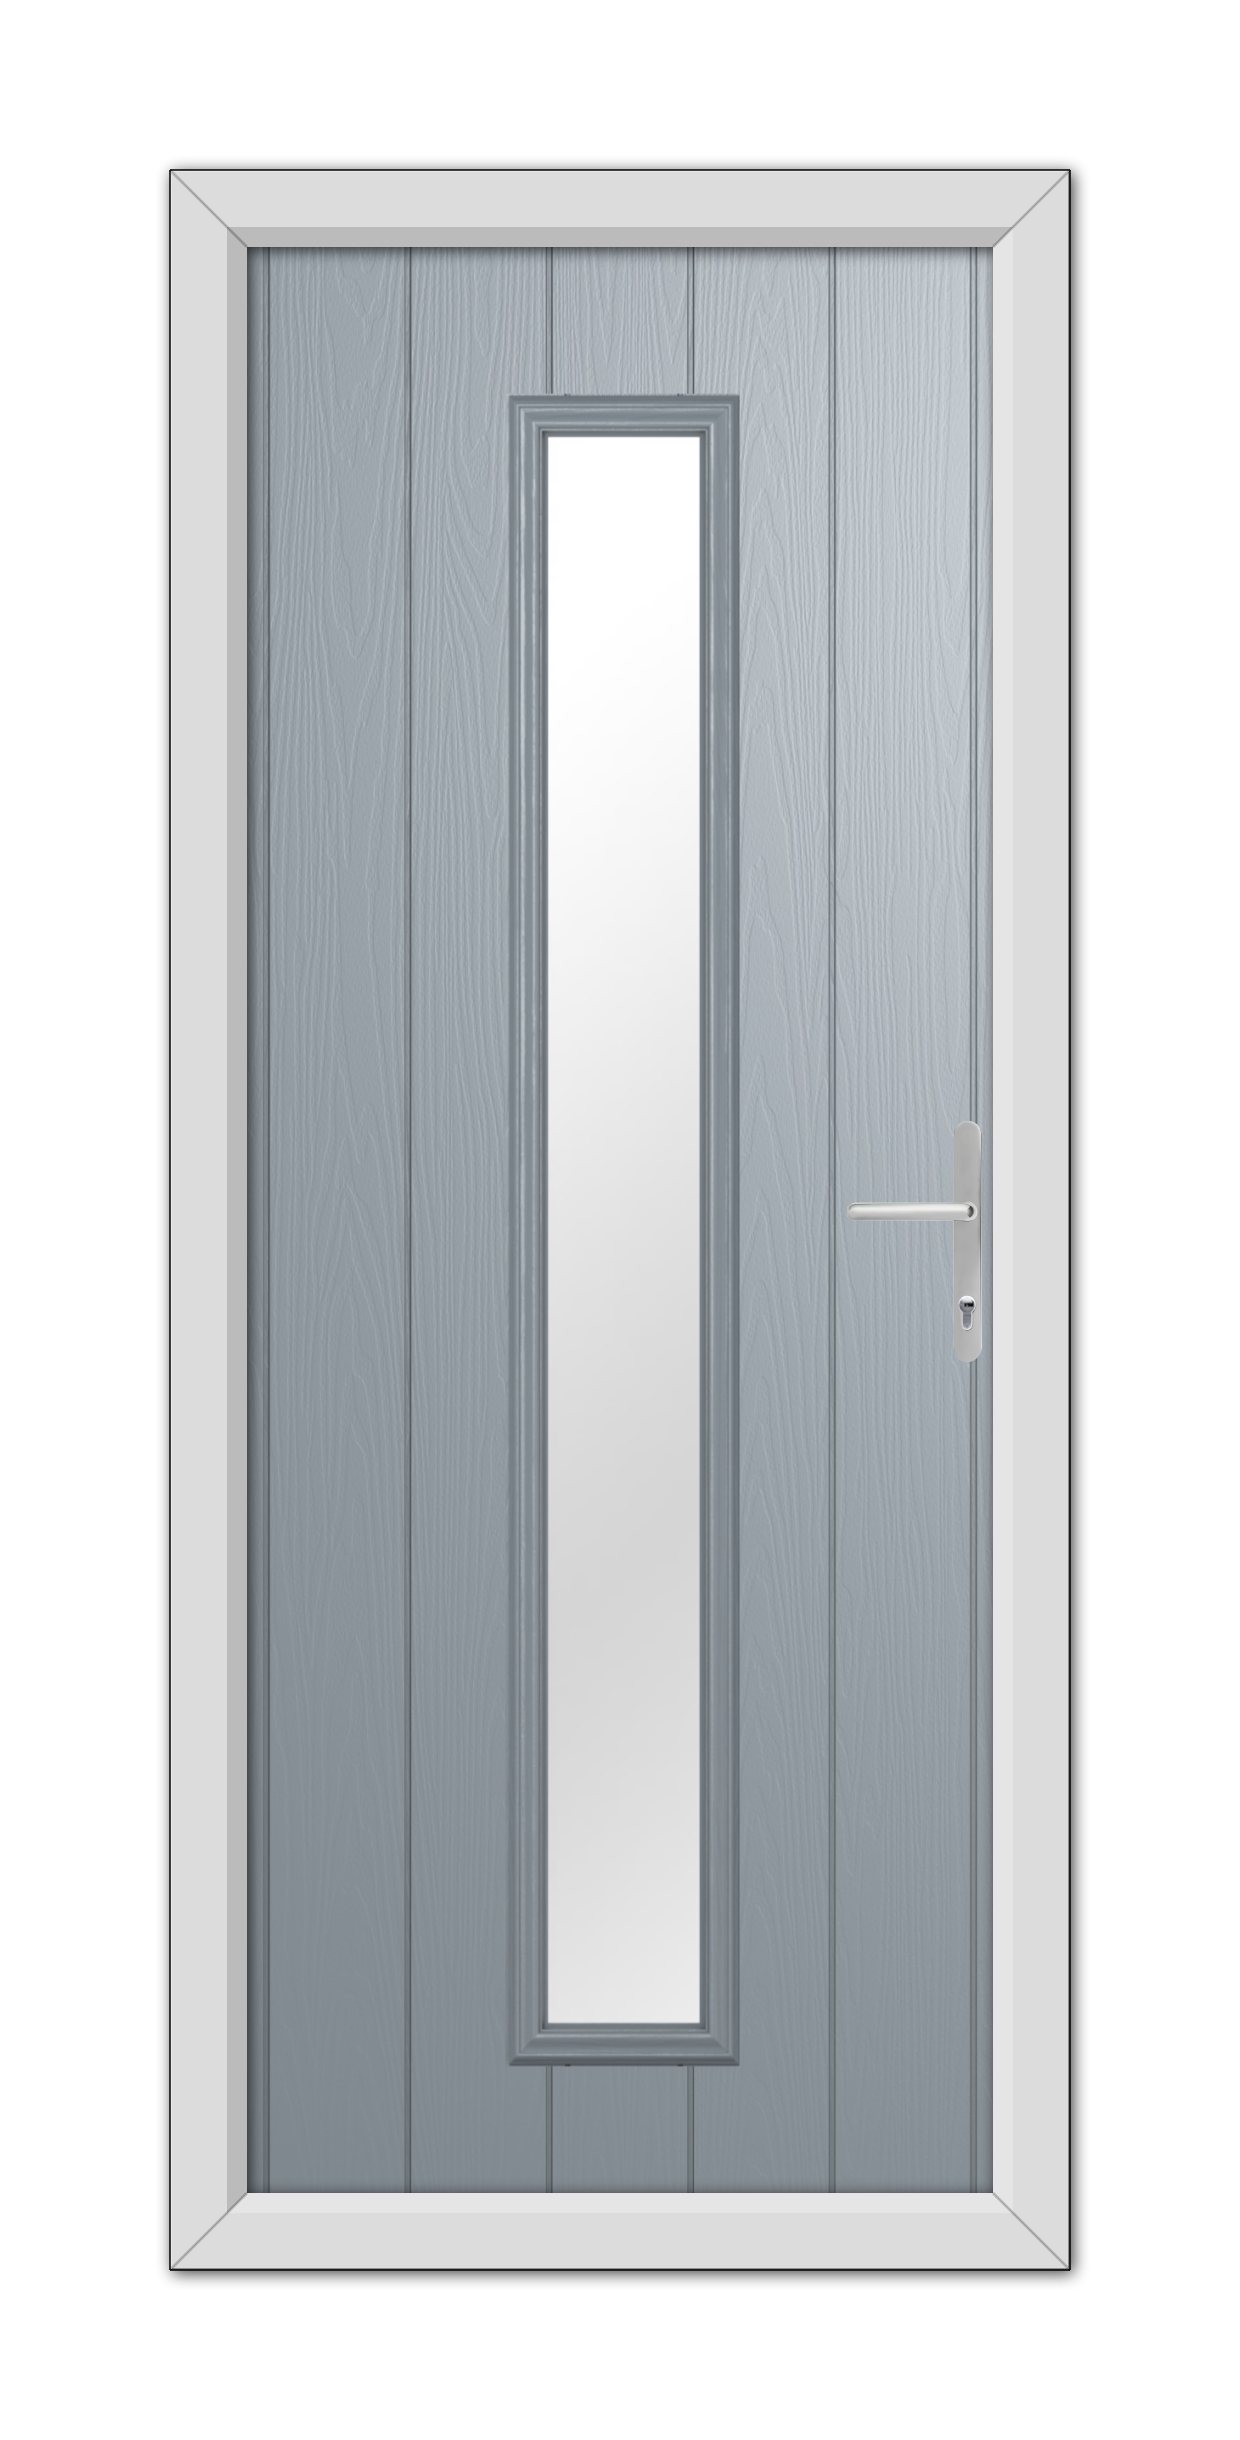 A French Grey Rutland Composite Door 48mm Timber Core with a vertical rectangular window and a metallic handle, set within a white frame.